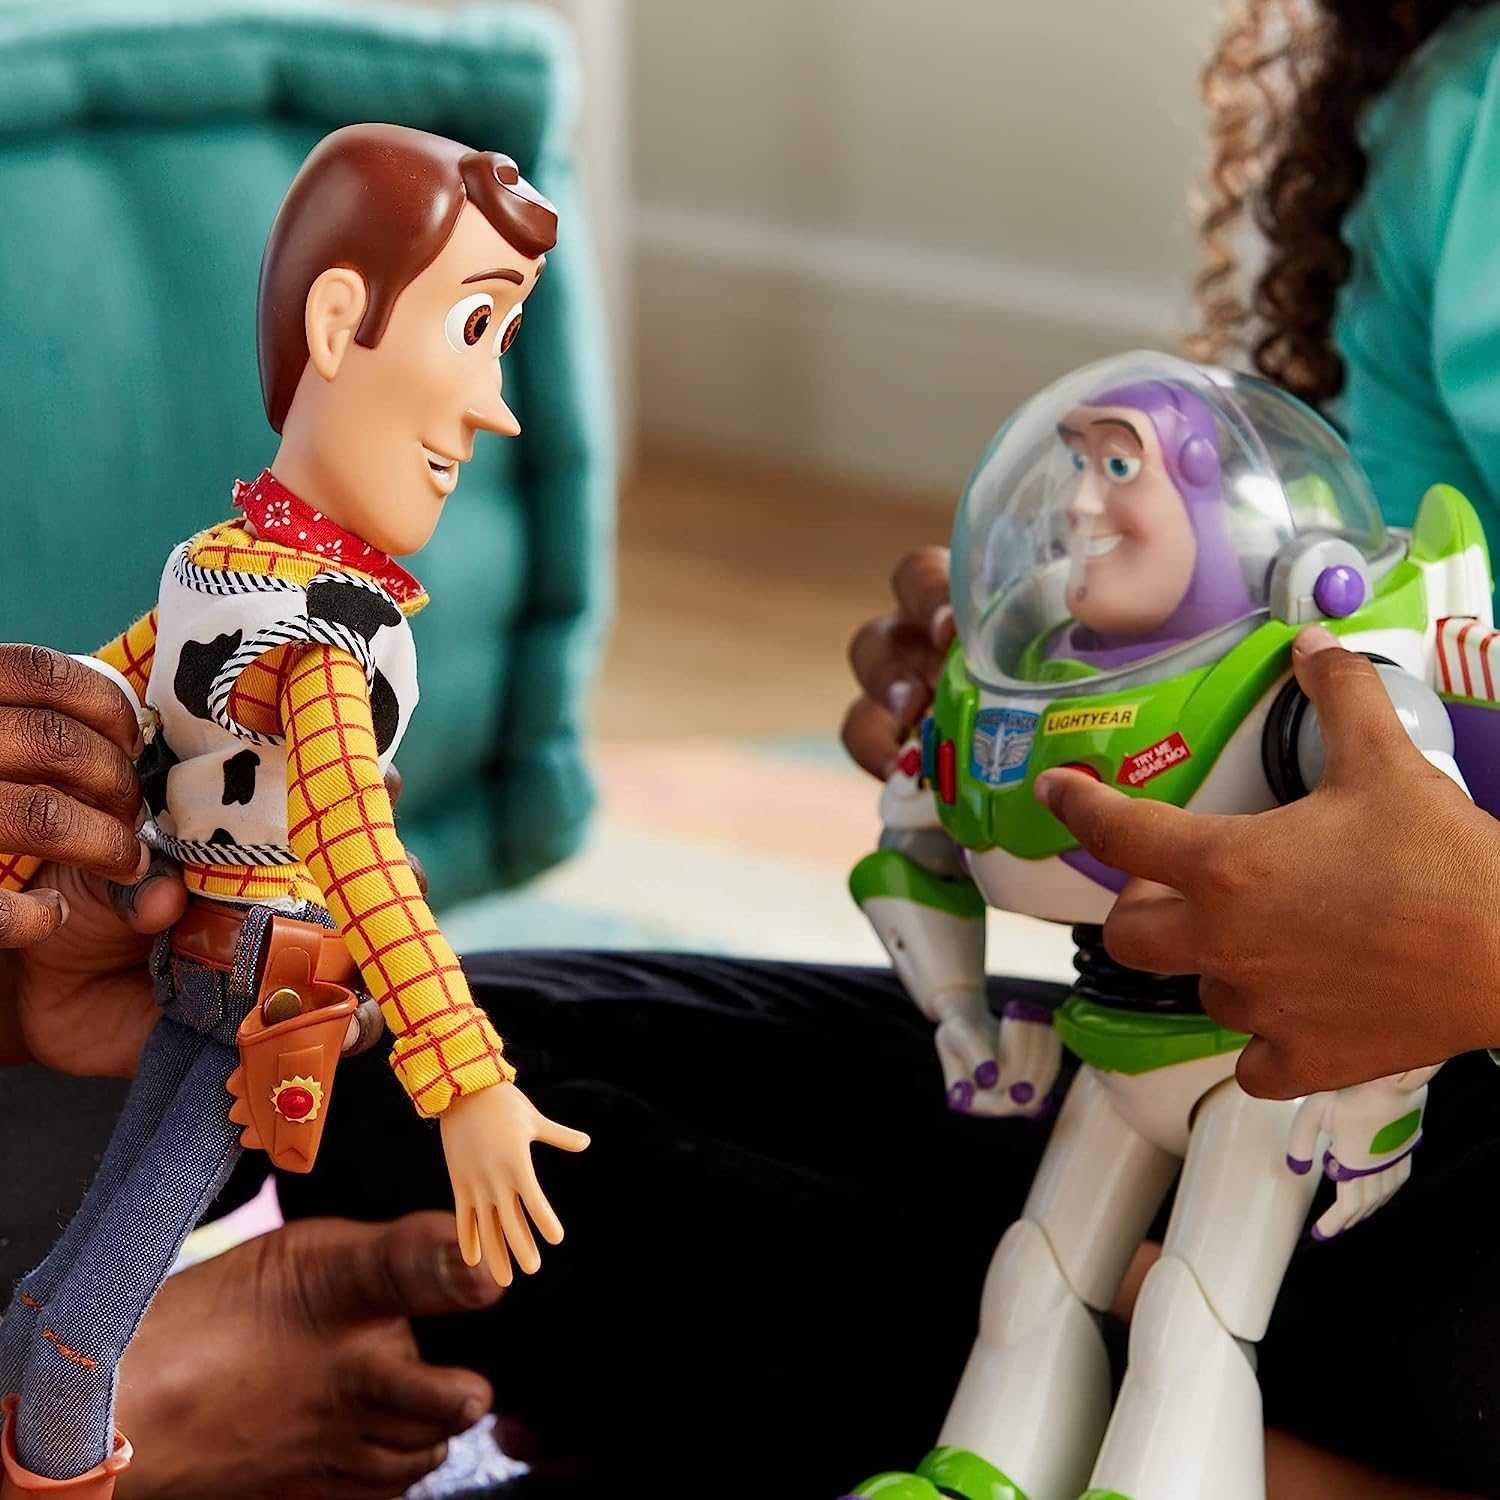 Disney jucarie interactiva  Woody din Toy Story